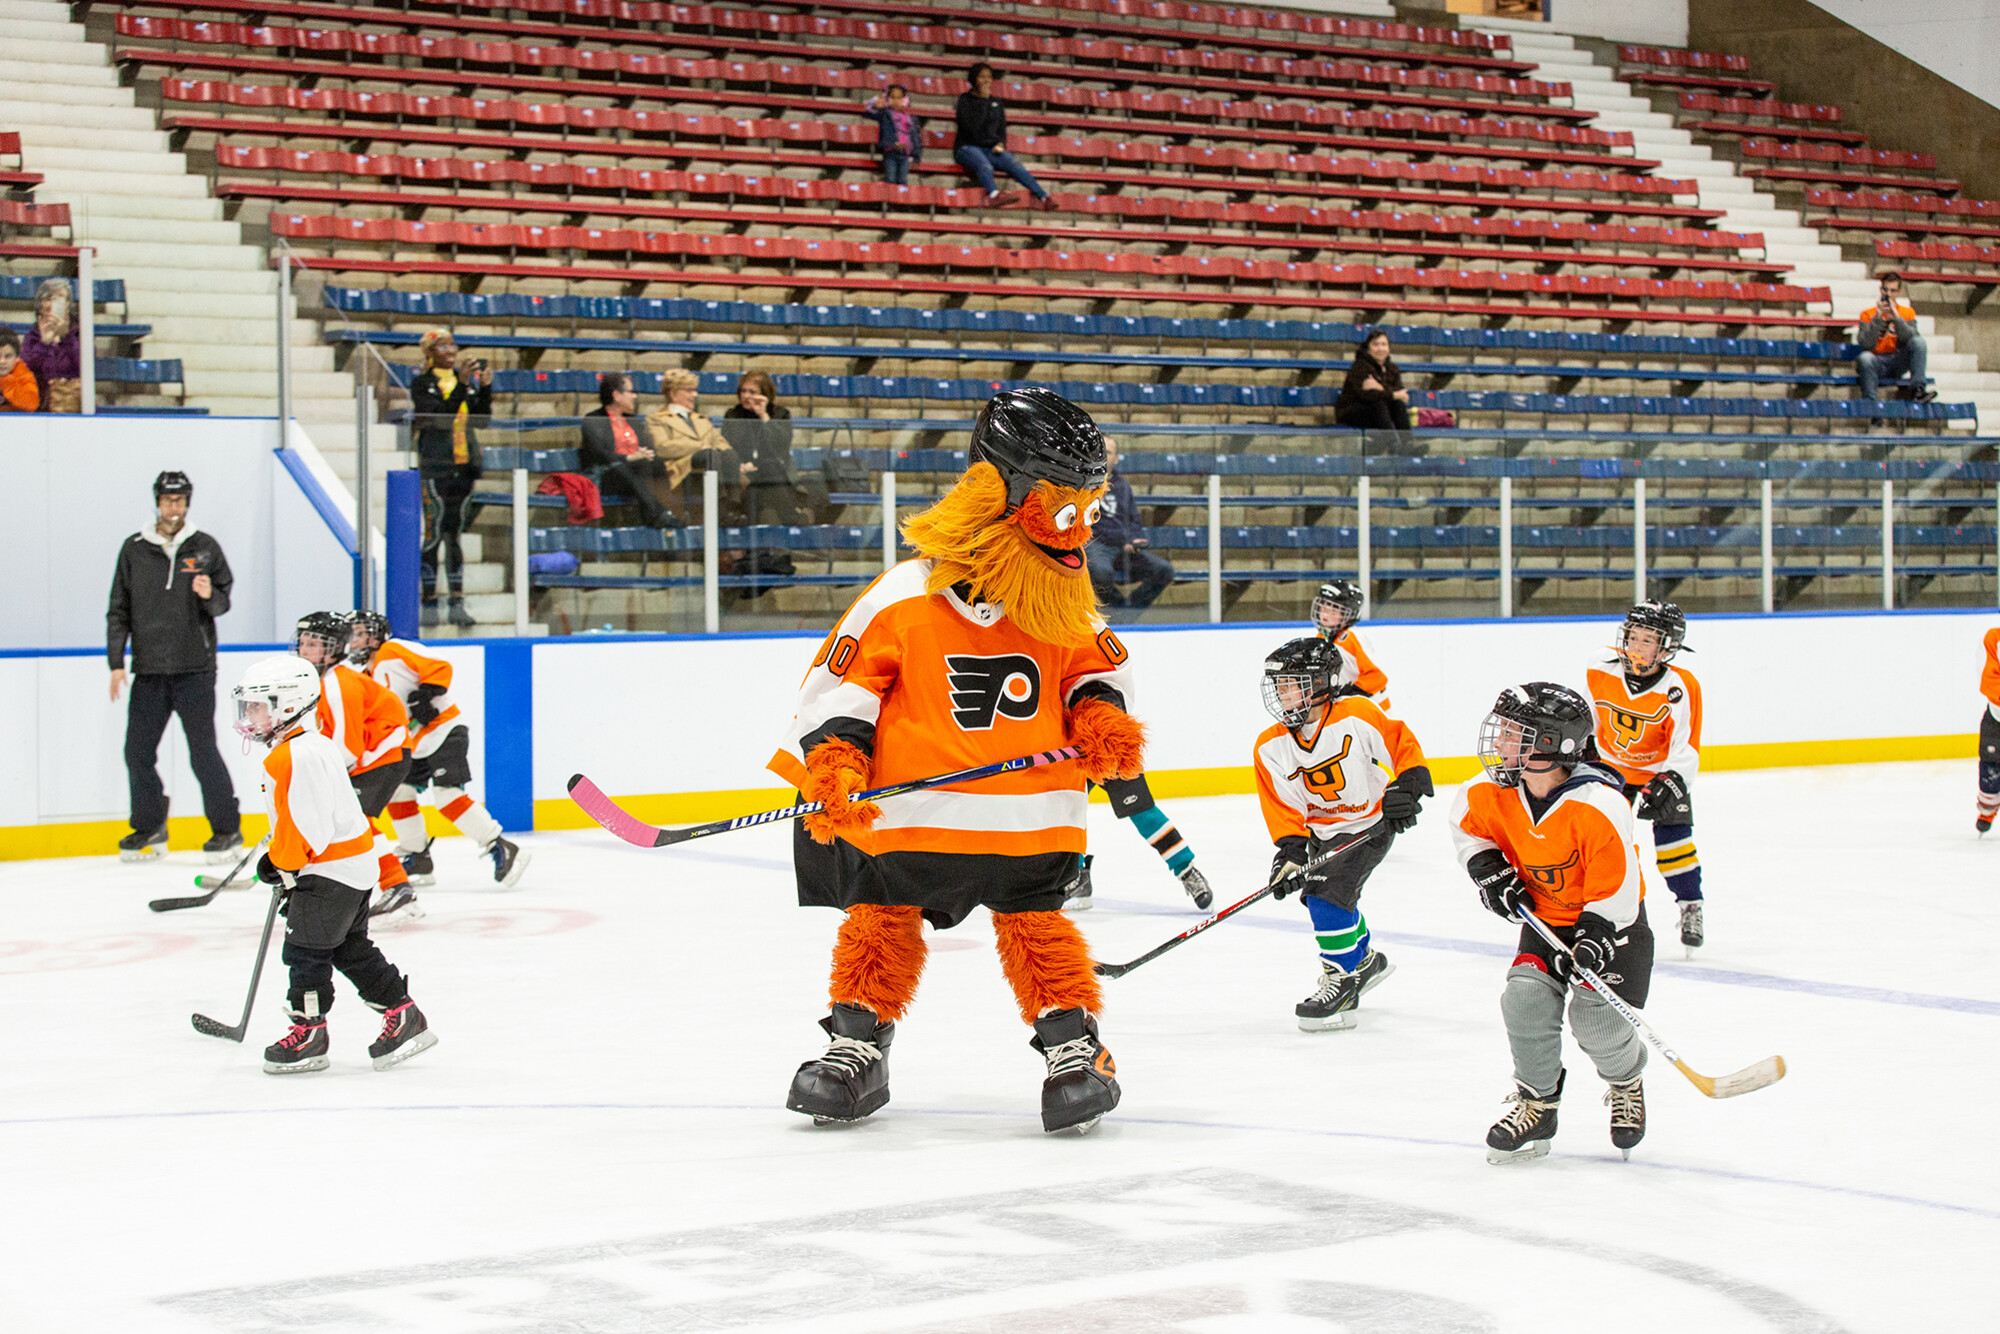 Gritty skating on the ice with members of a youth hockey league